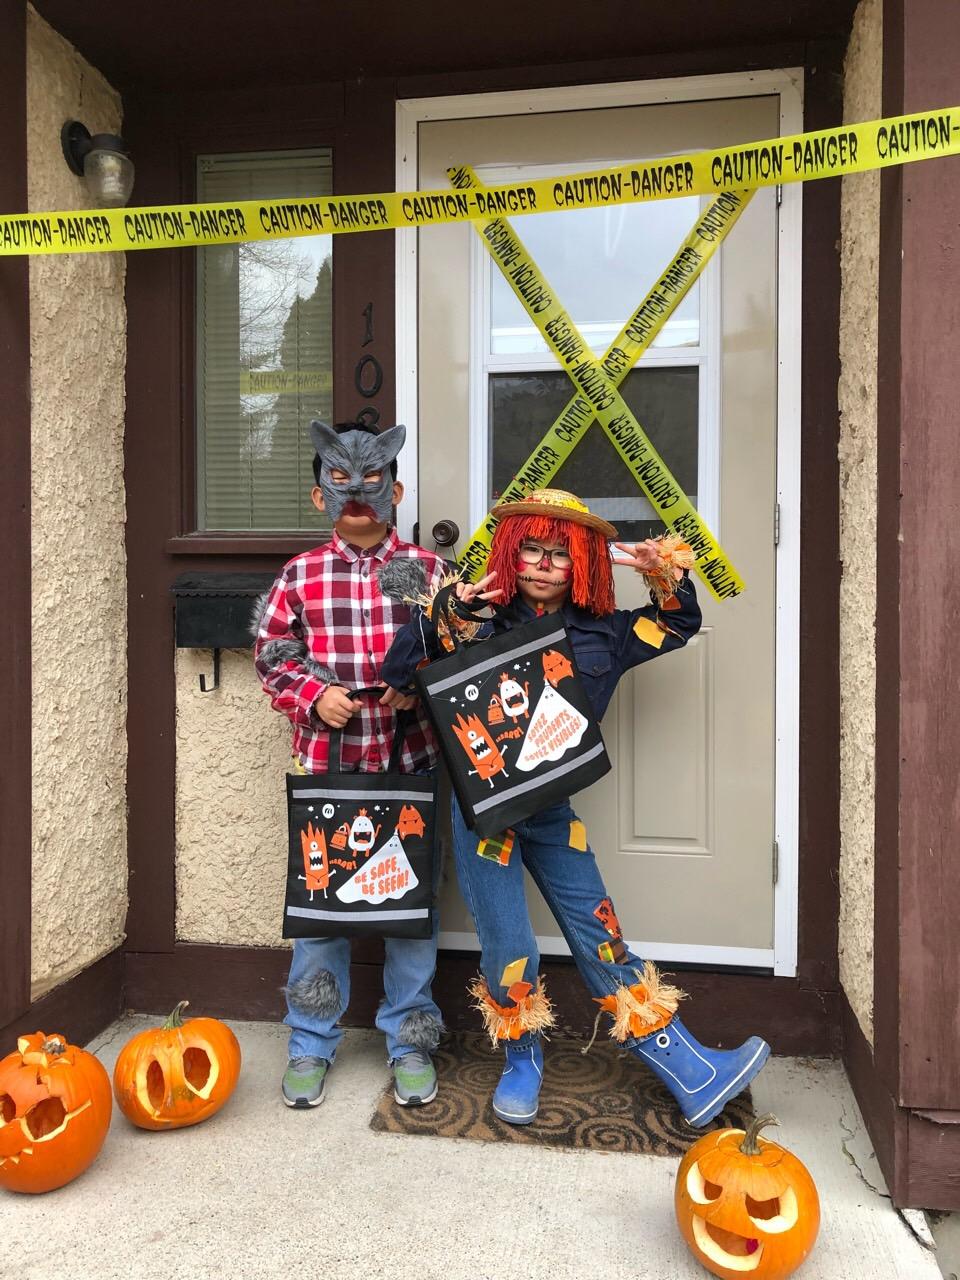 our youngest trick or treaters dresses as wearwolf and scarecrow